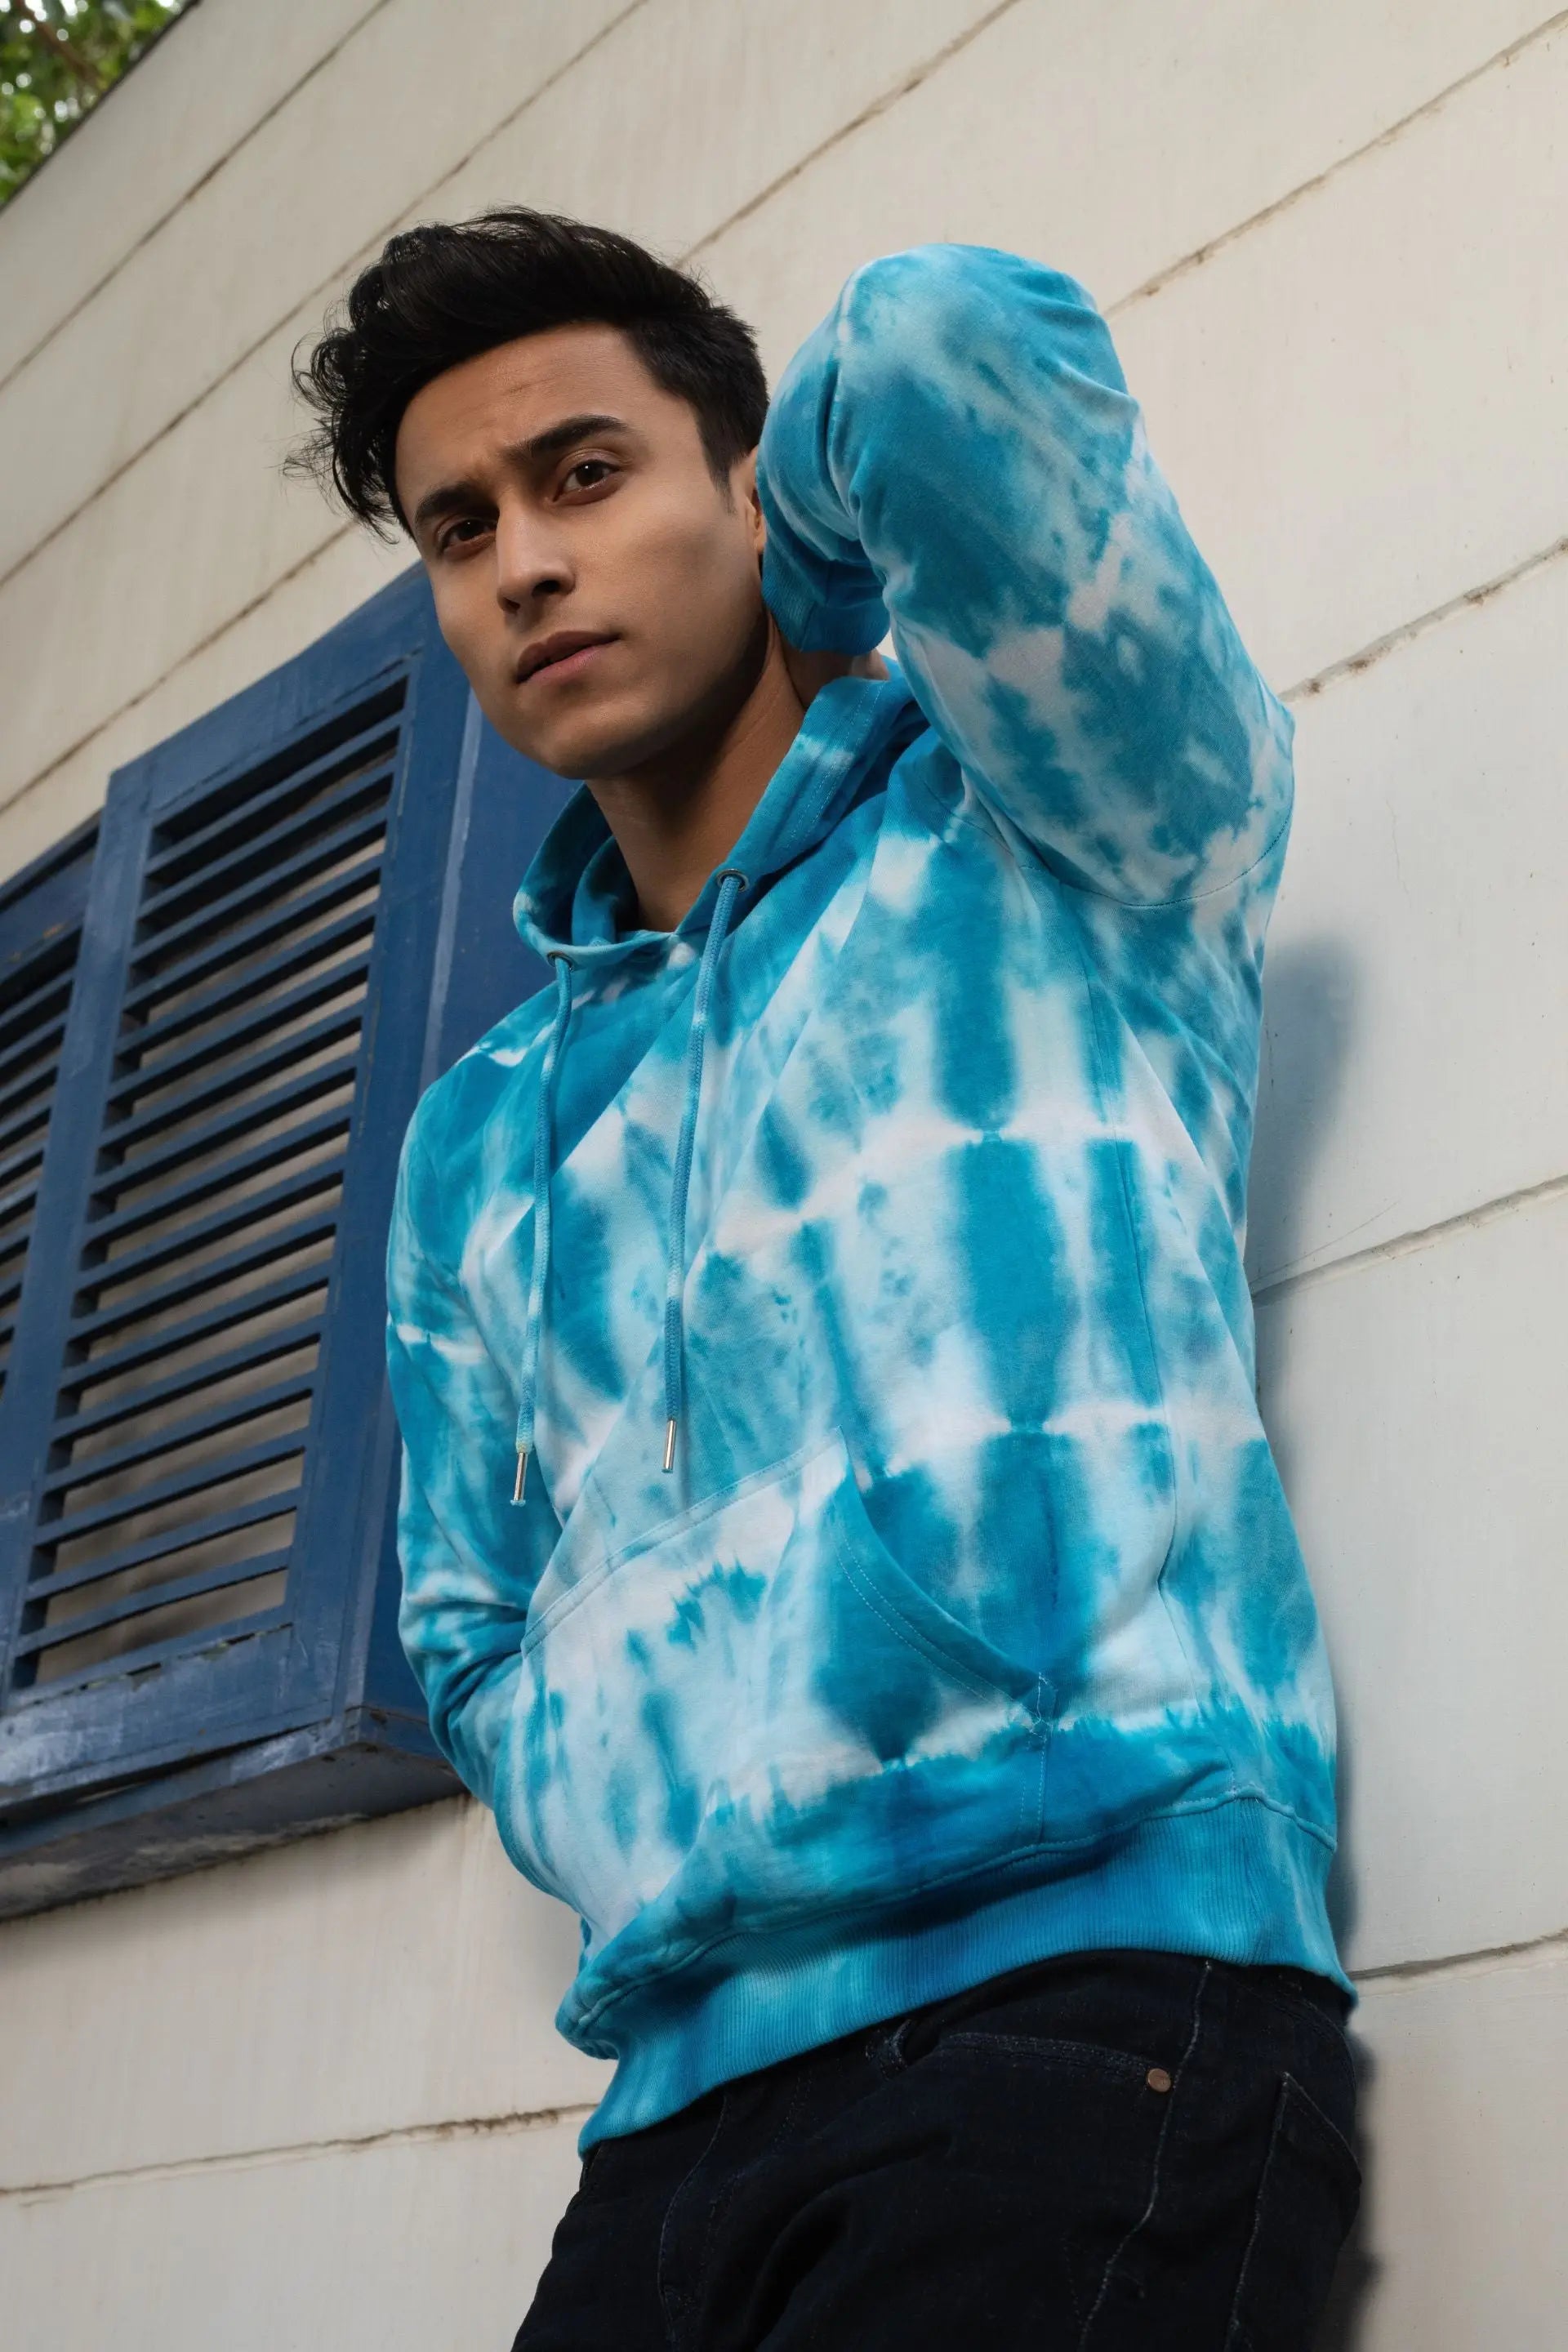 Firangi Yarn Super Soft Cotton Tie&Dye Blue and White Ombre Hoodie With Kangaroo Pockets